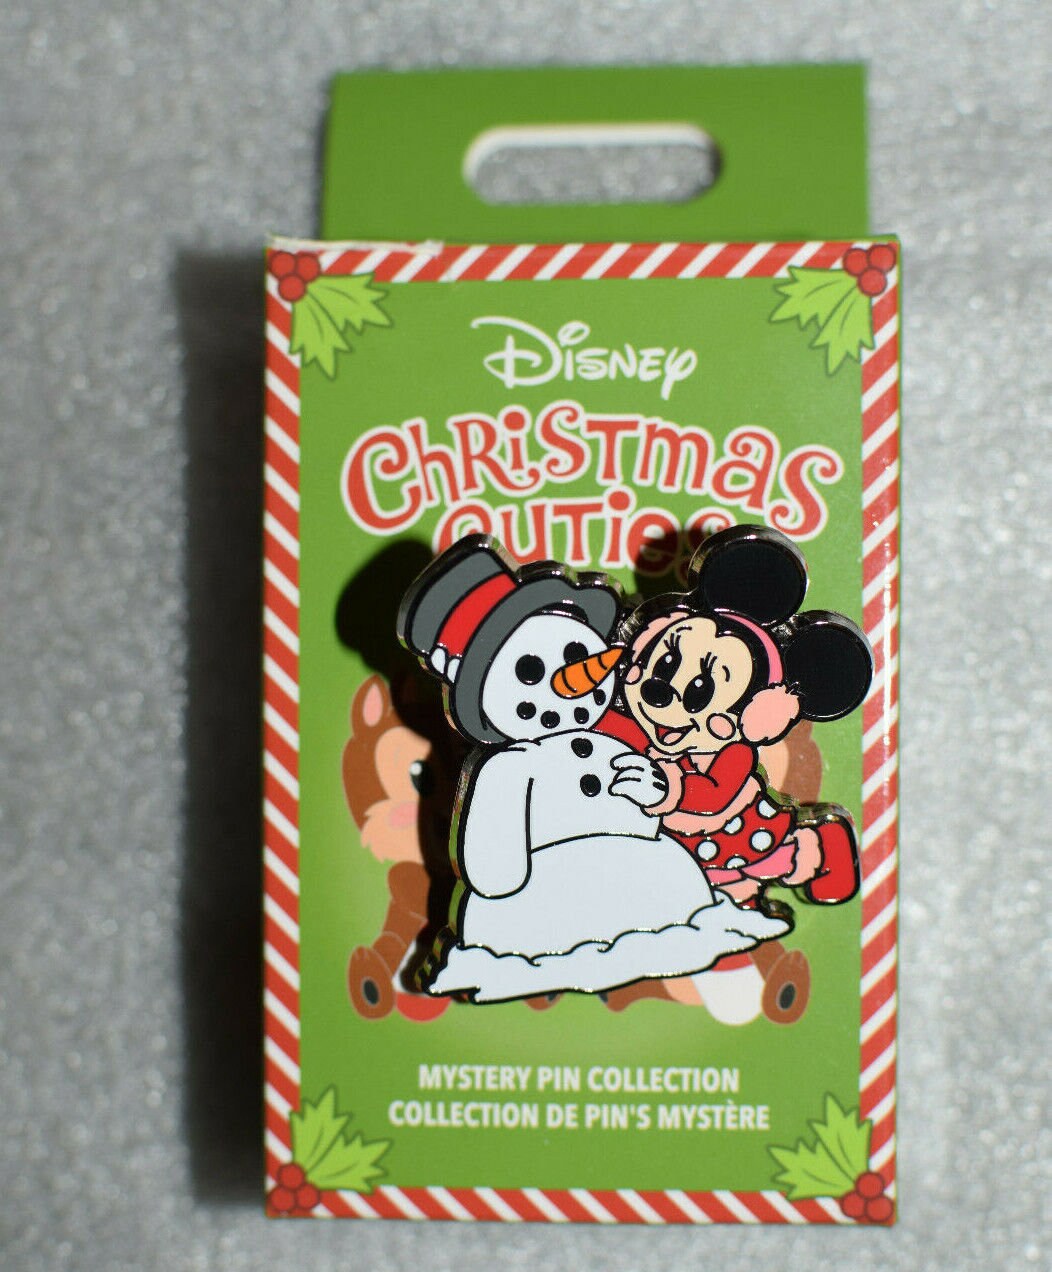 Disney 2021 Christmas Cuties Mystery Pin Collection LR Minnie